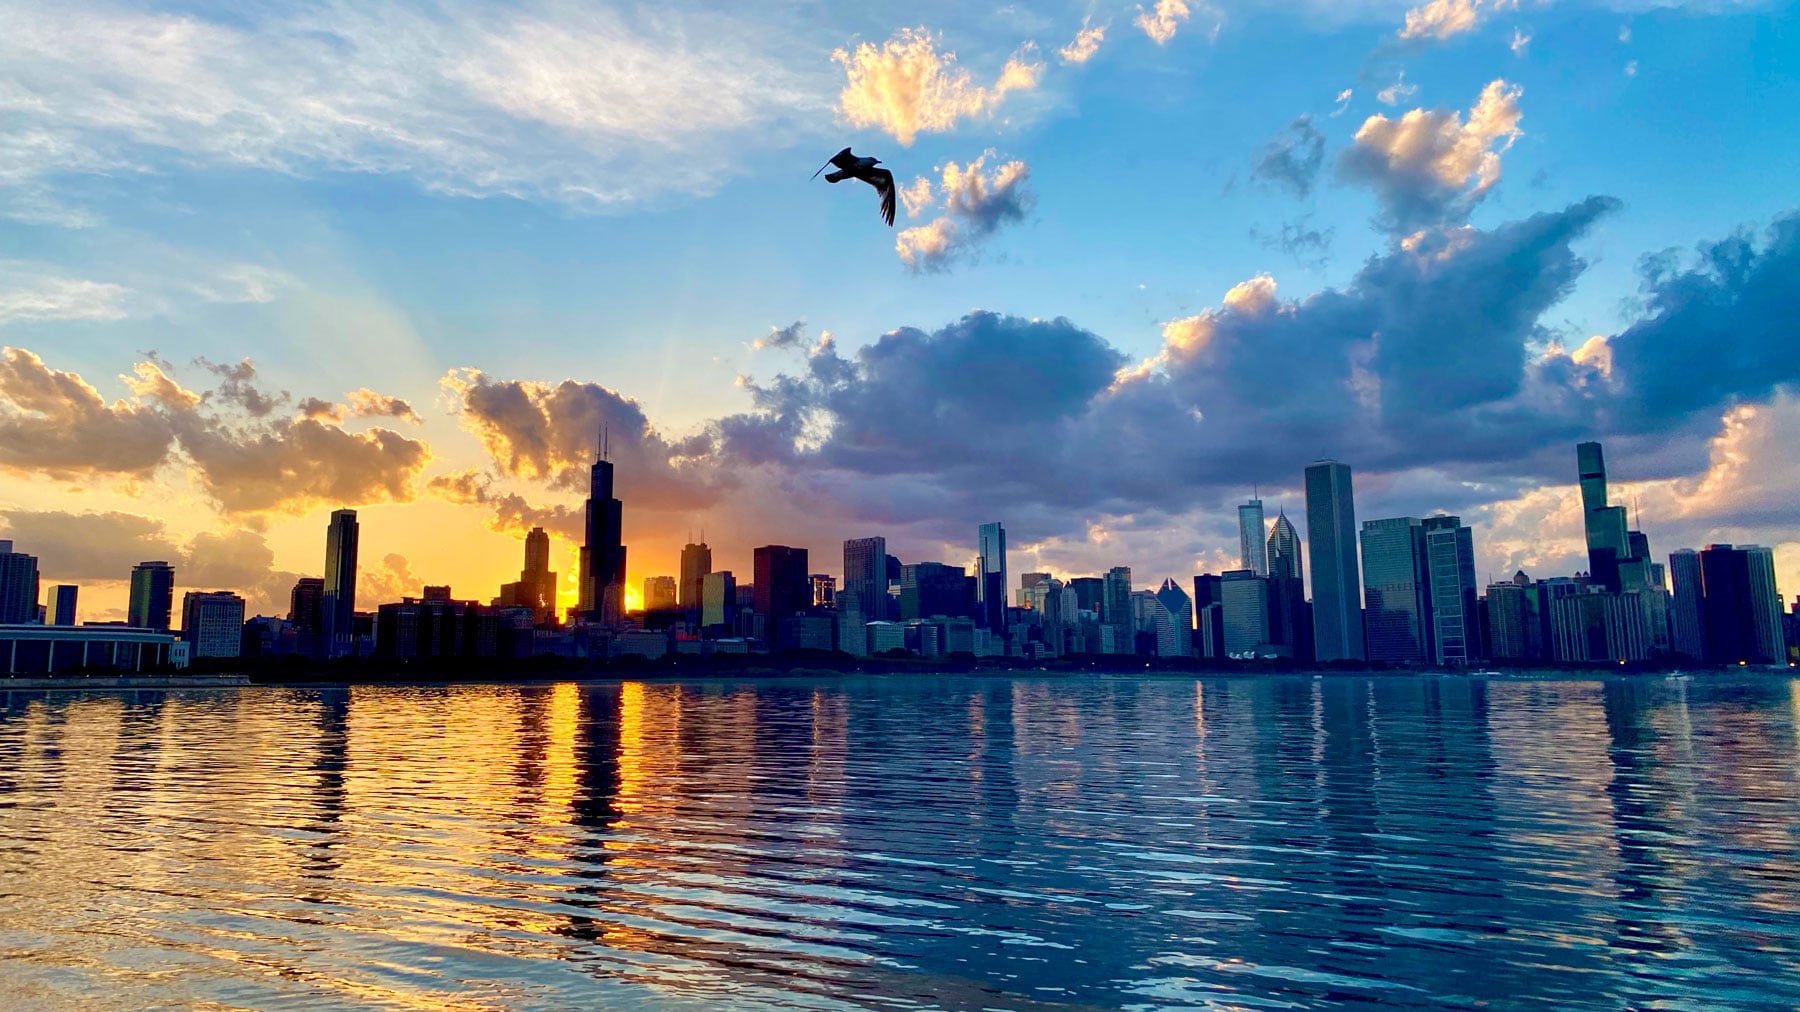 Chicago skyline pictured from Lake Michigan at sunset, with bird flying over